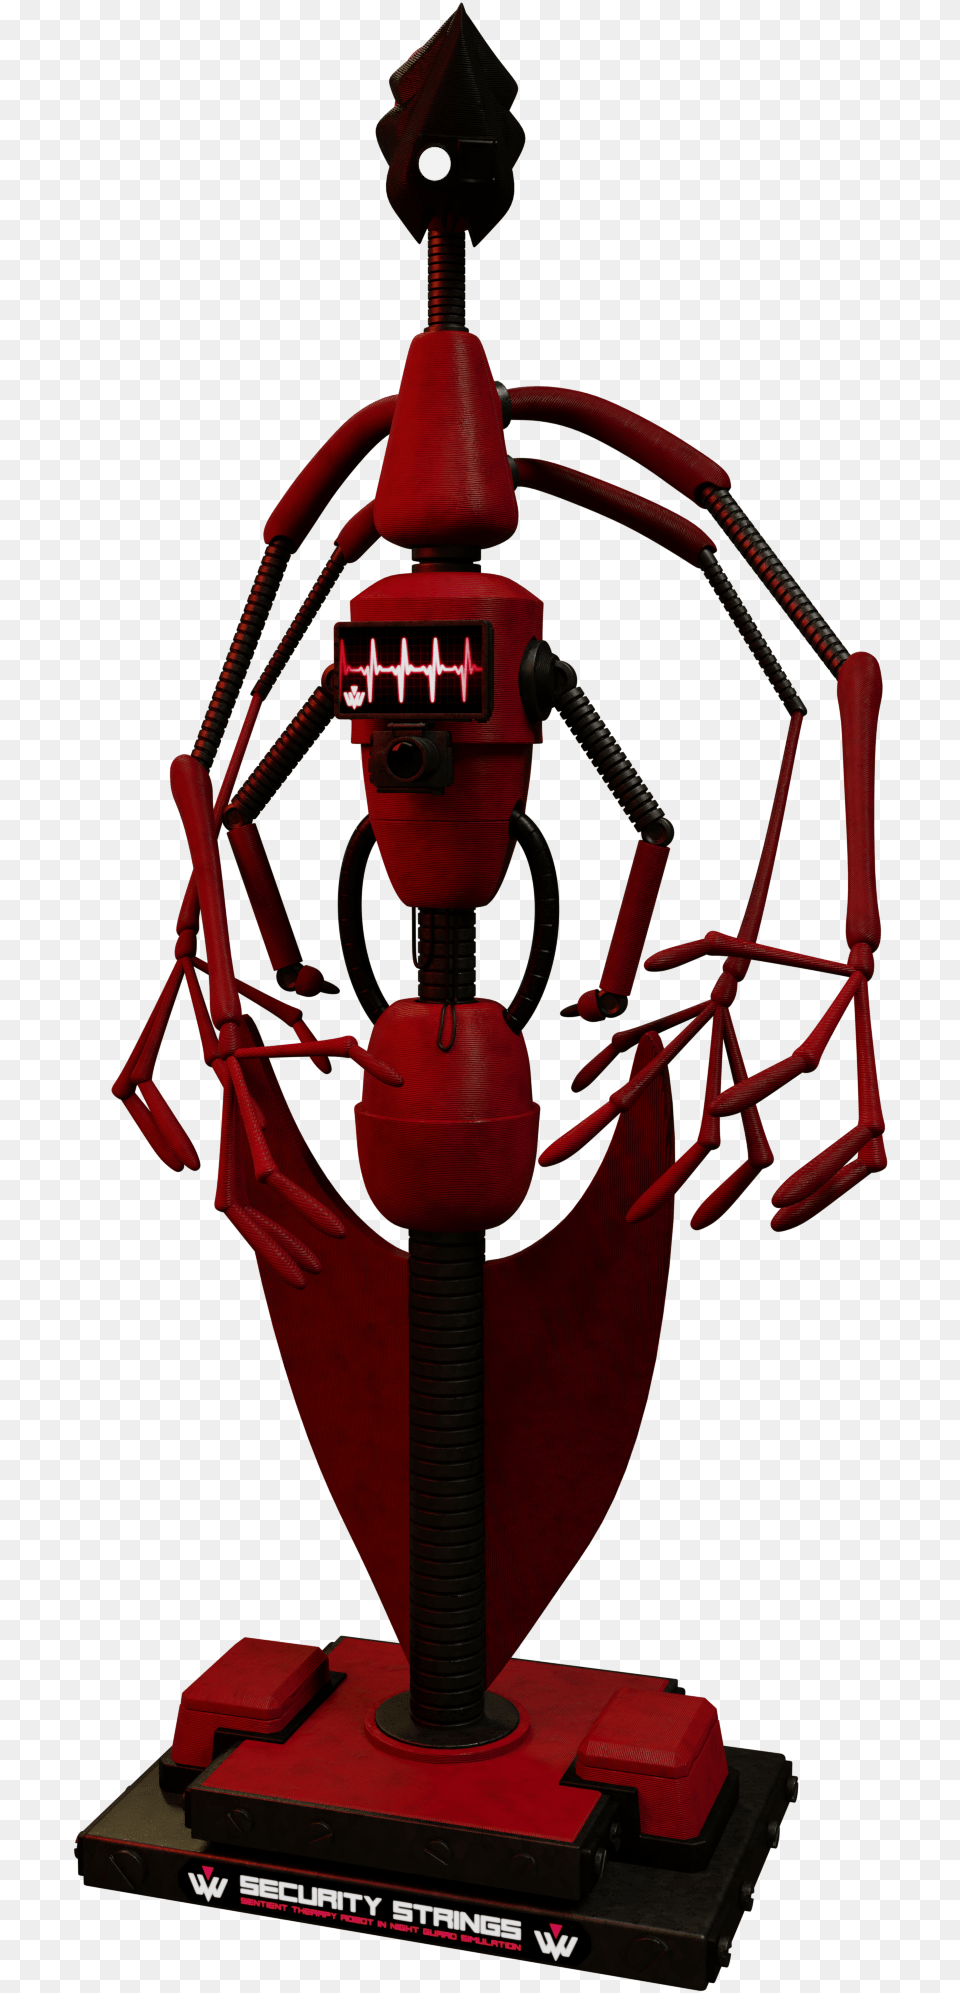 Popgoes Memories Strings Download Popgoes Memories Strings, Toy, Electrical Device, Microphone, Robot Png